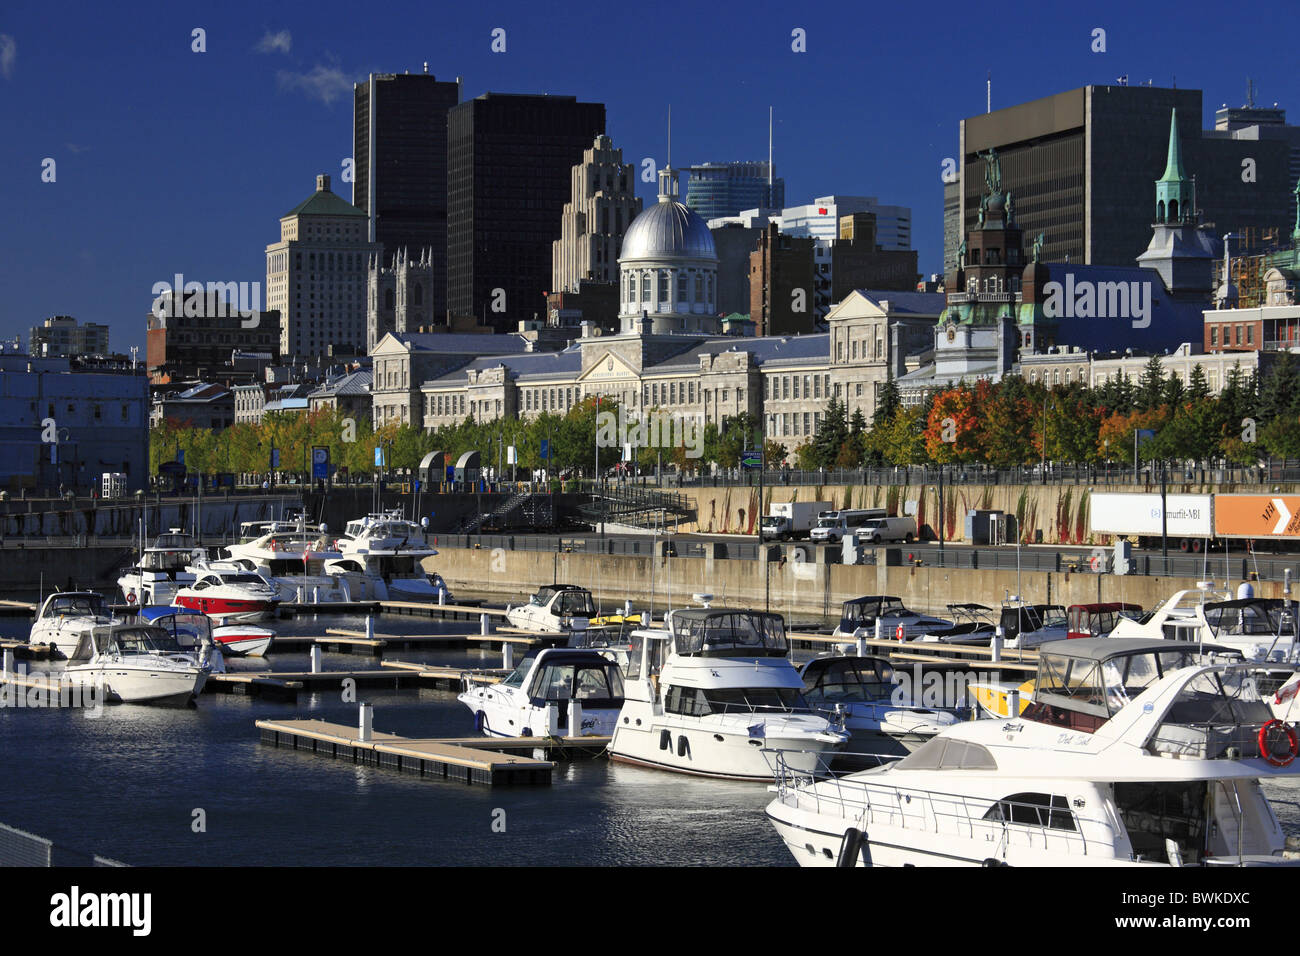 Boats in the old port, Montreal, Quebec, Canada Stock Photo